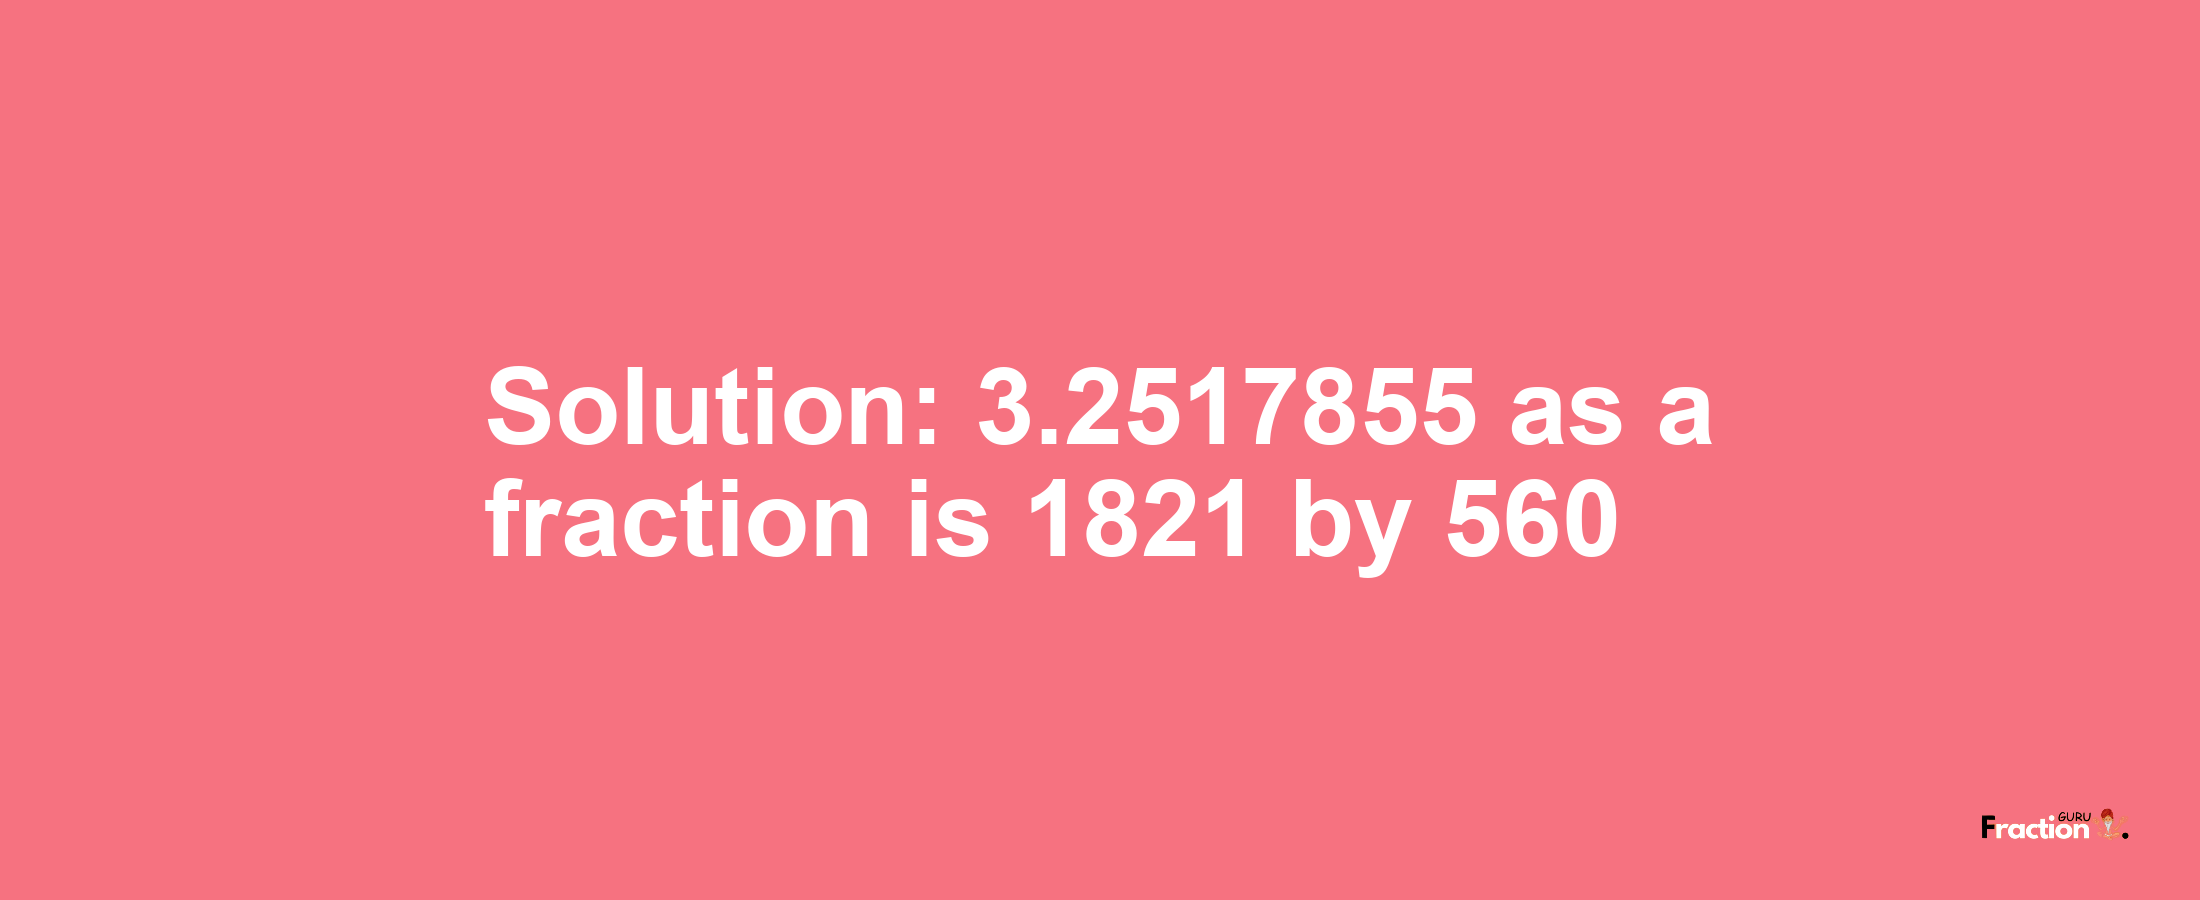 Solution:3.2517855 as a fraction is 1821/560